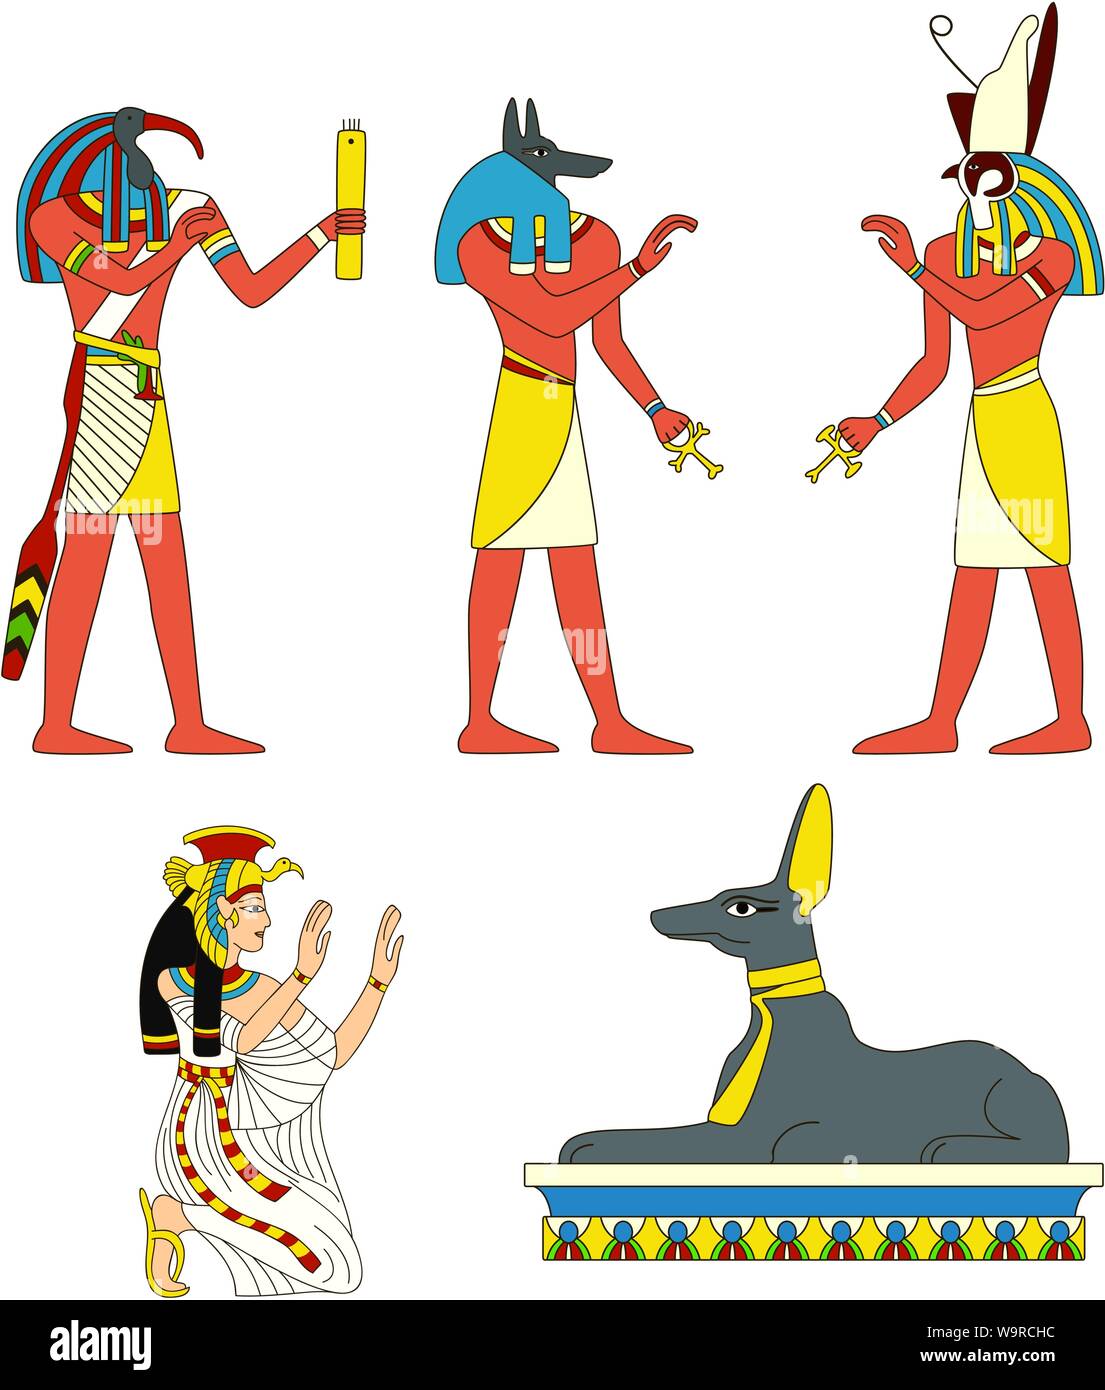 Collection of ancient Egyptian gods images, Thoth, Horus, Isis, Anubis, Anubis in the form of a jackal. EPS8 Stock Vector